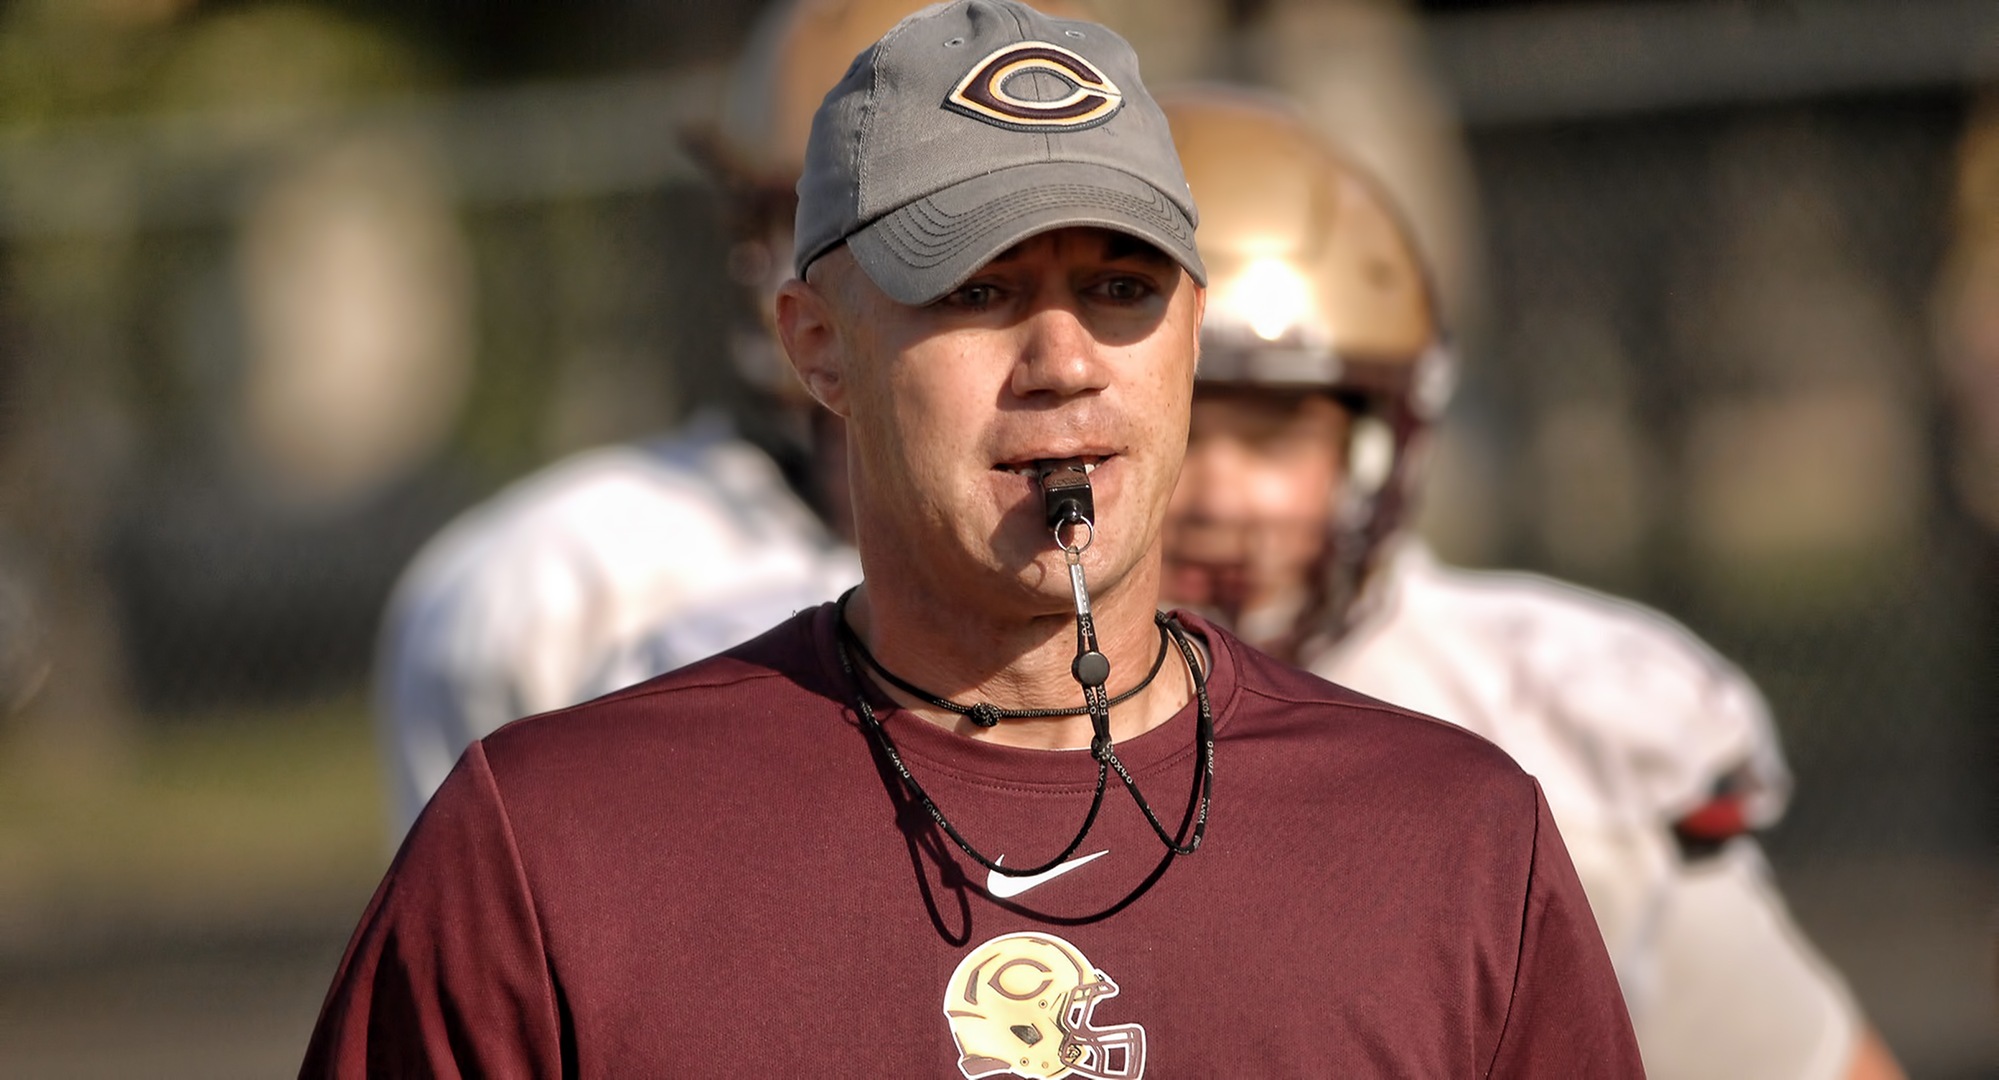 Travis Titus was named the Offensive Coordinator after serving as an assistant coach for the Cobbers in 2019.